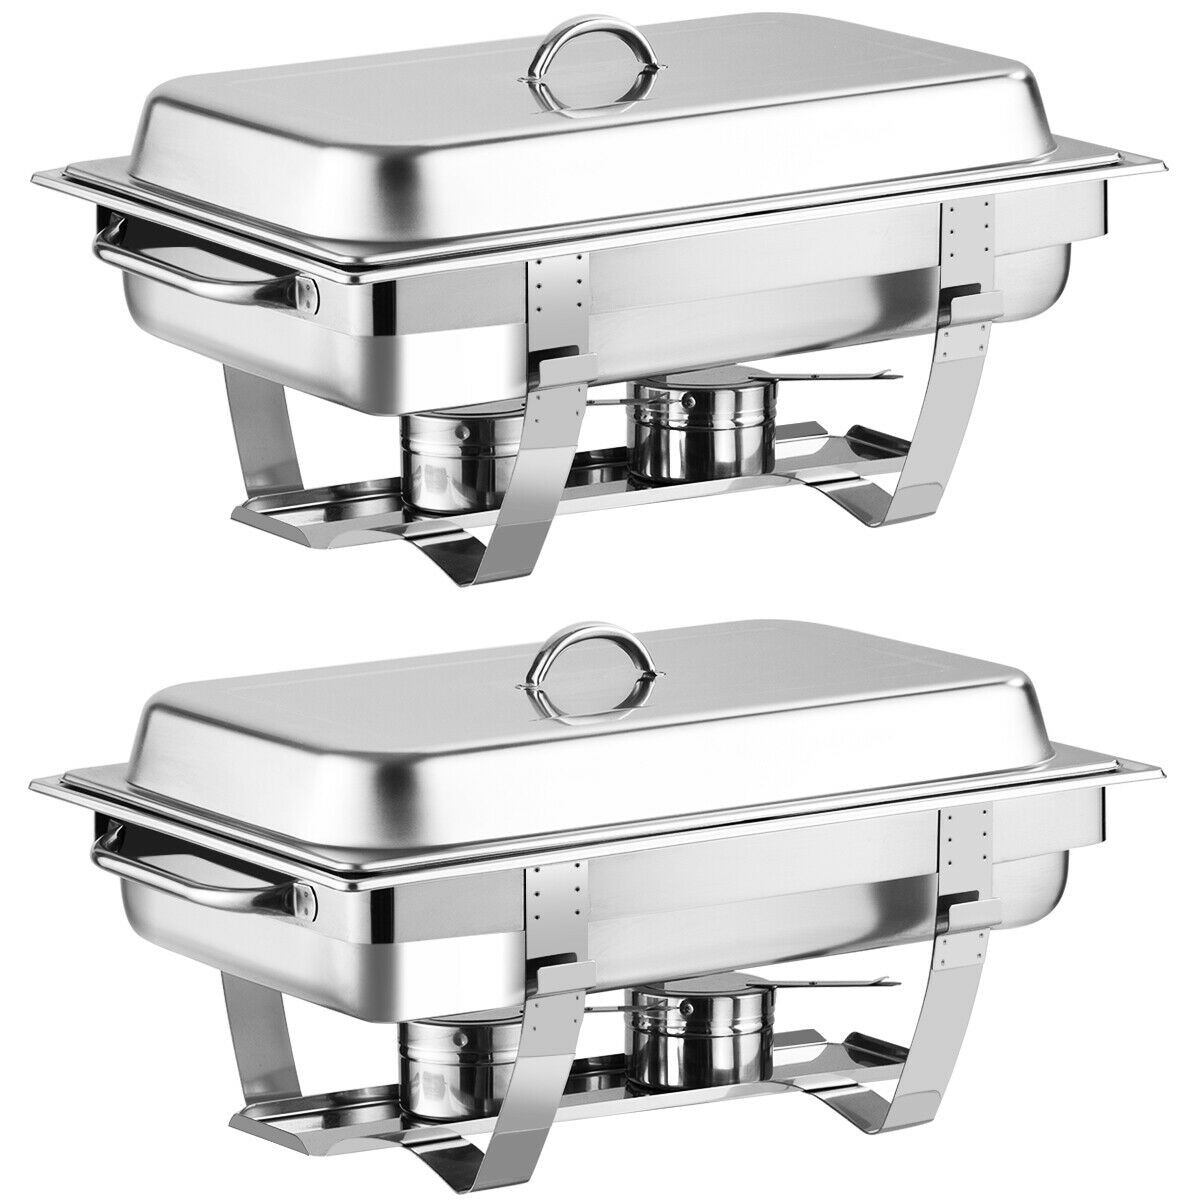 https://ak1.ostkcdn.com/images/products/is/images/direct/ff96c177bdd9f5226d0bb404bc22aa62fd654373/2-Packs-Stainless-Steel-Full-Size-Chafing-Dish.jpg